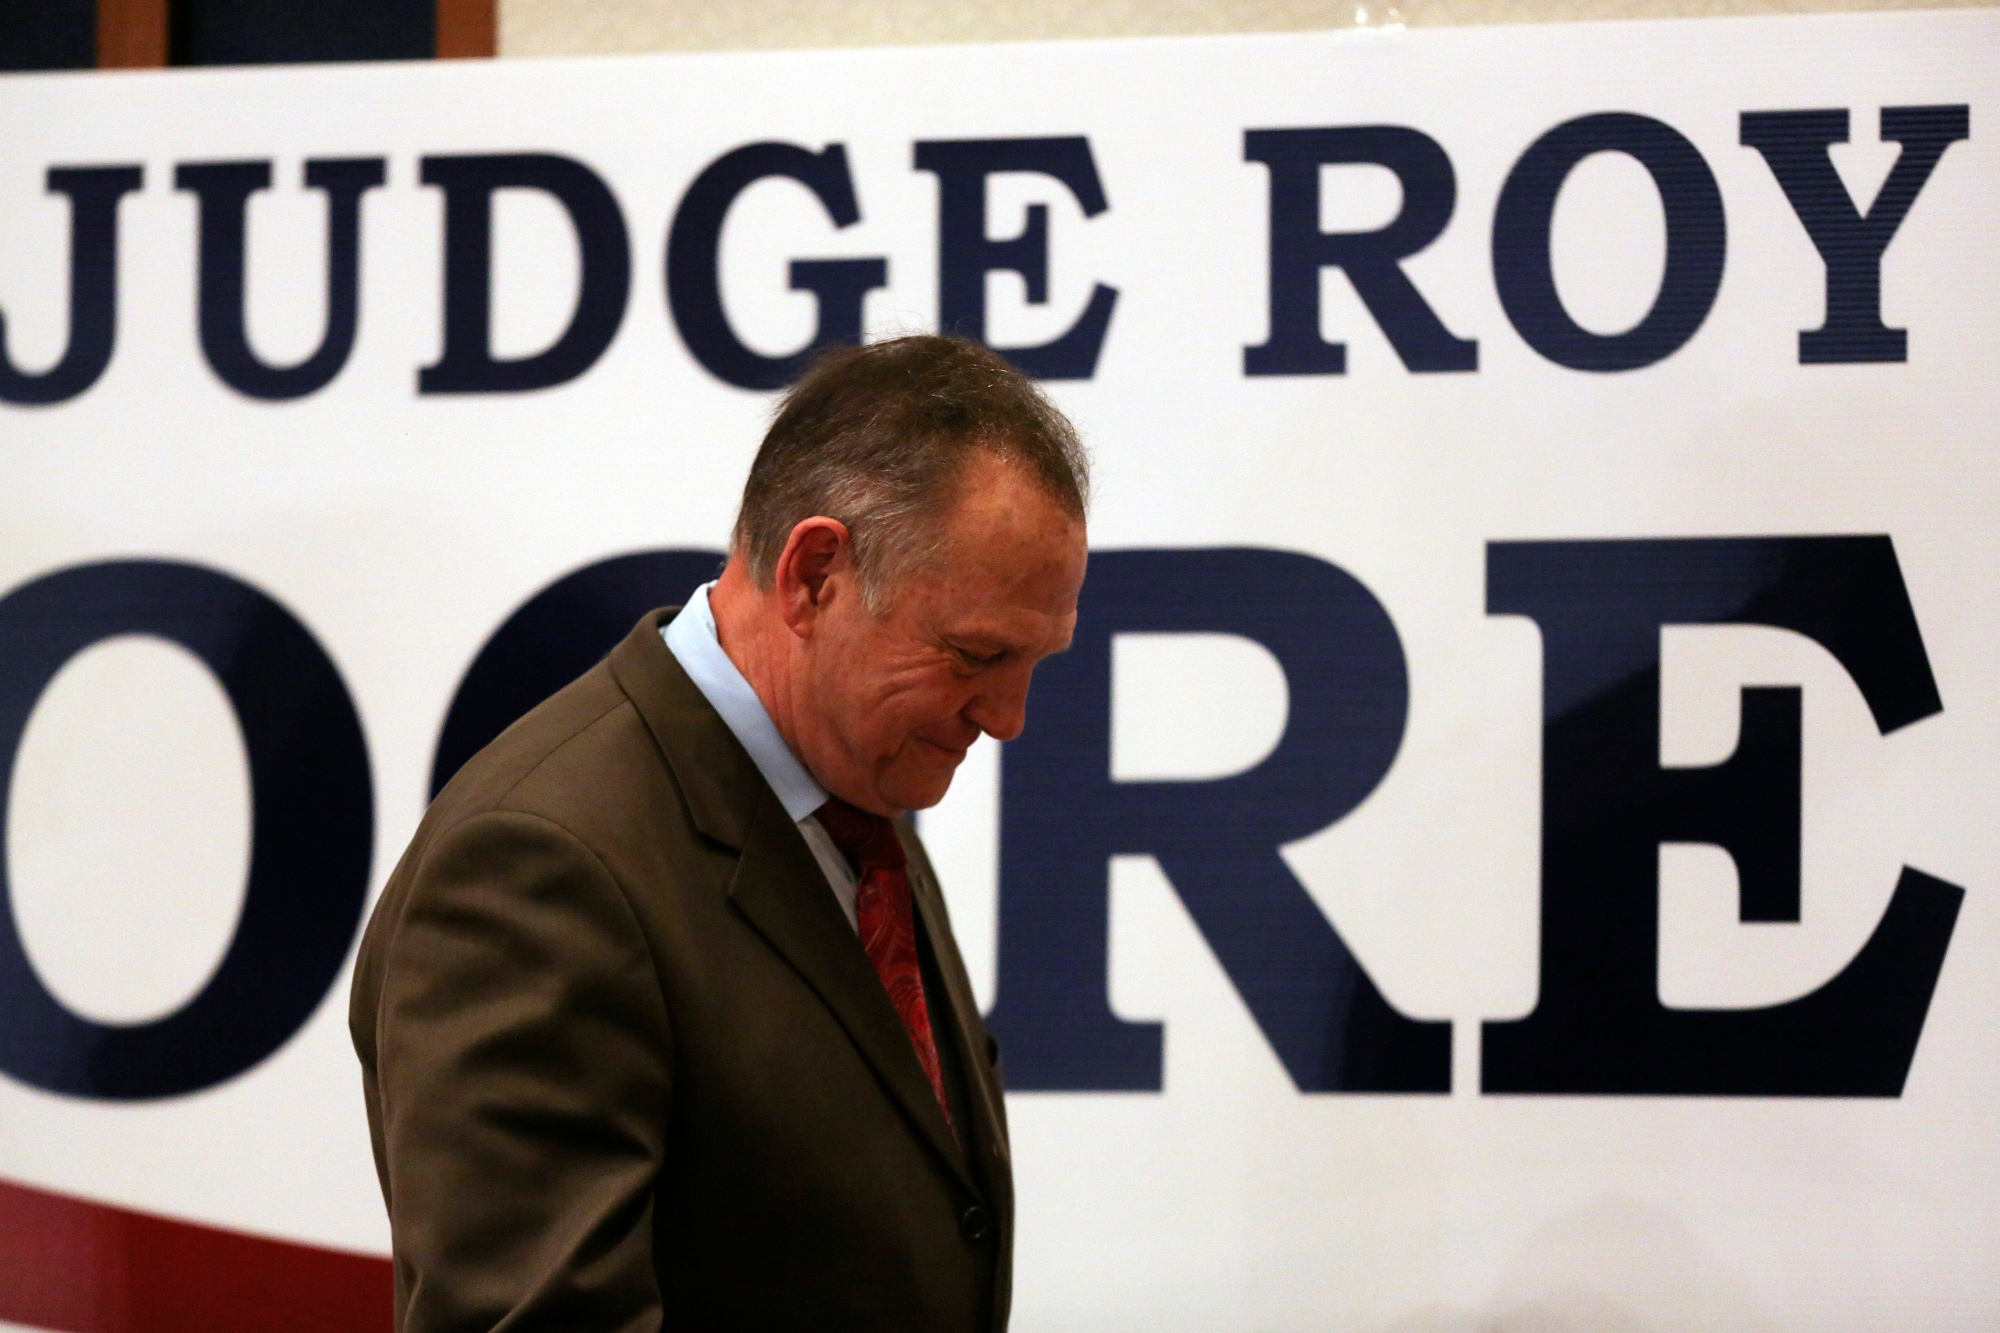 epaselect epa06386179 Republican Senate candidate Roy Moore walks off stage saying he would not concede defeat till all the votes were in and possibly demand a recount, at his watch party in Montgomery, Alabama, USA, 12 December 2017.  Citizens of Alabama voted to decide whether Republican Roy Moore or Democrat Doug Jones will hold a Senate seat in the Federal government. According to media reports, Democratic Party candidate Doug Jones won the election.  EPA/DAN ANDERSON epaselect USA ELECTION SENATE ALABAMA ROY MOORE